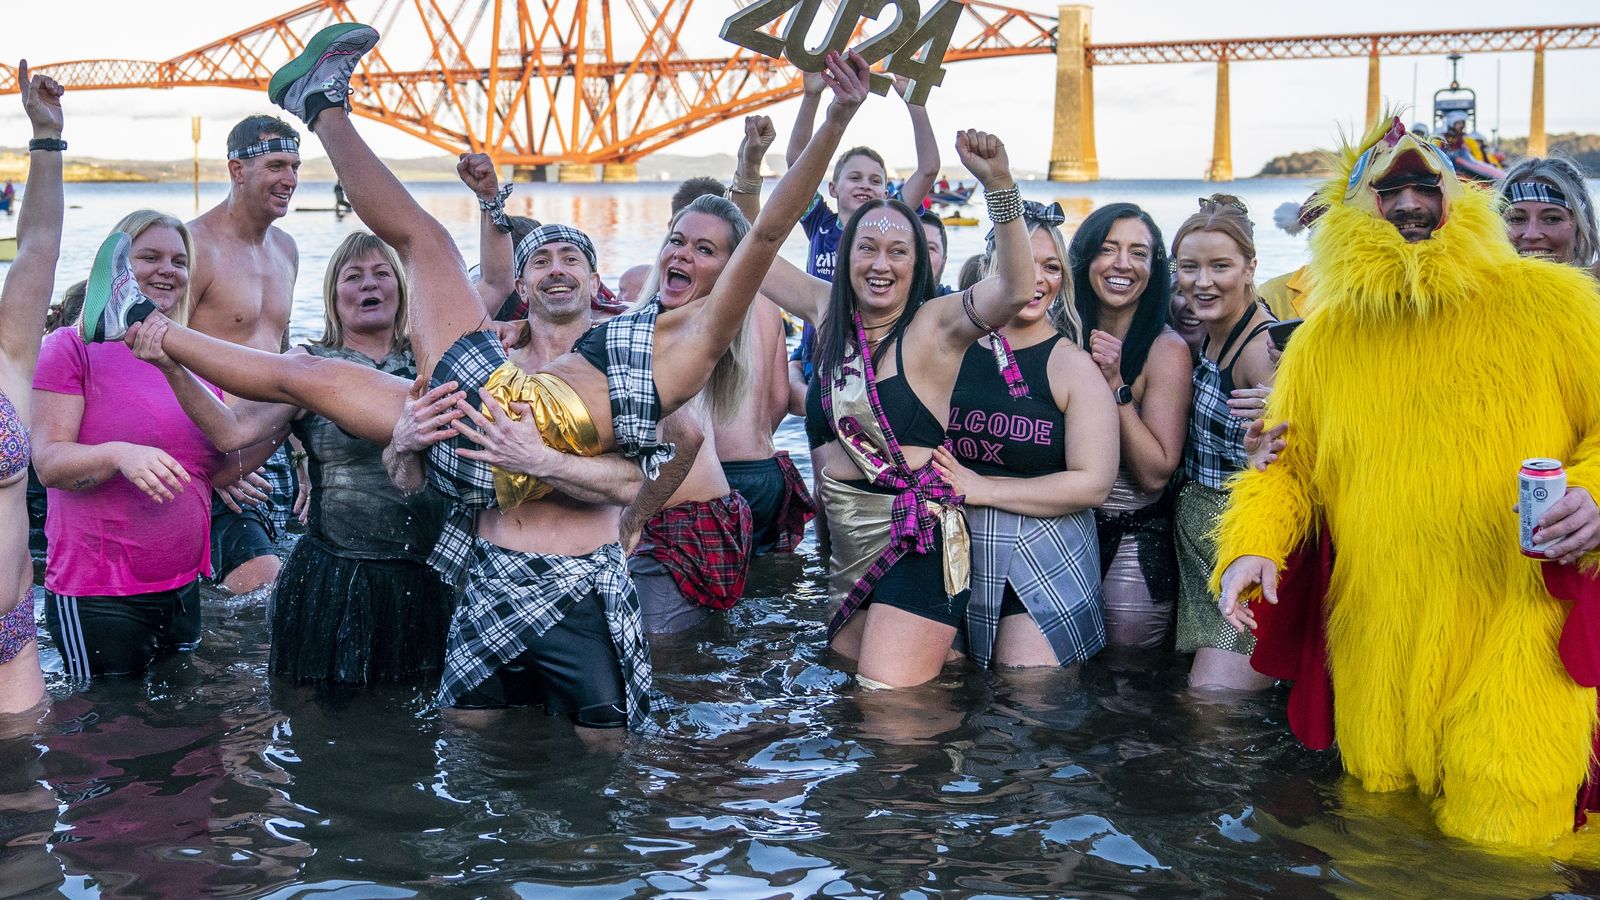 New Year: Hogmanay celebrations continue with ice-cold Loony Dook